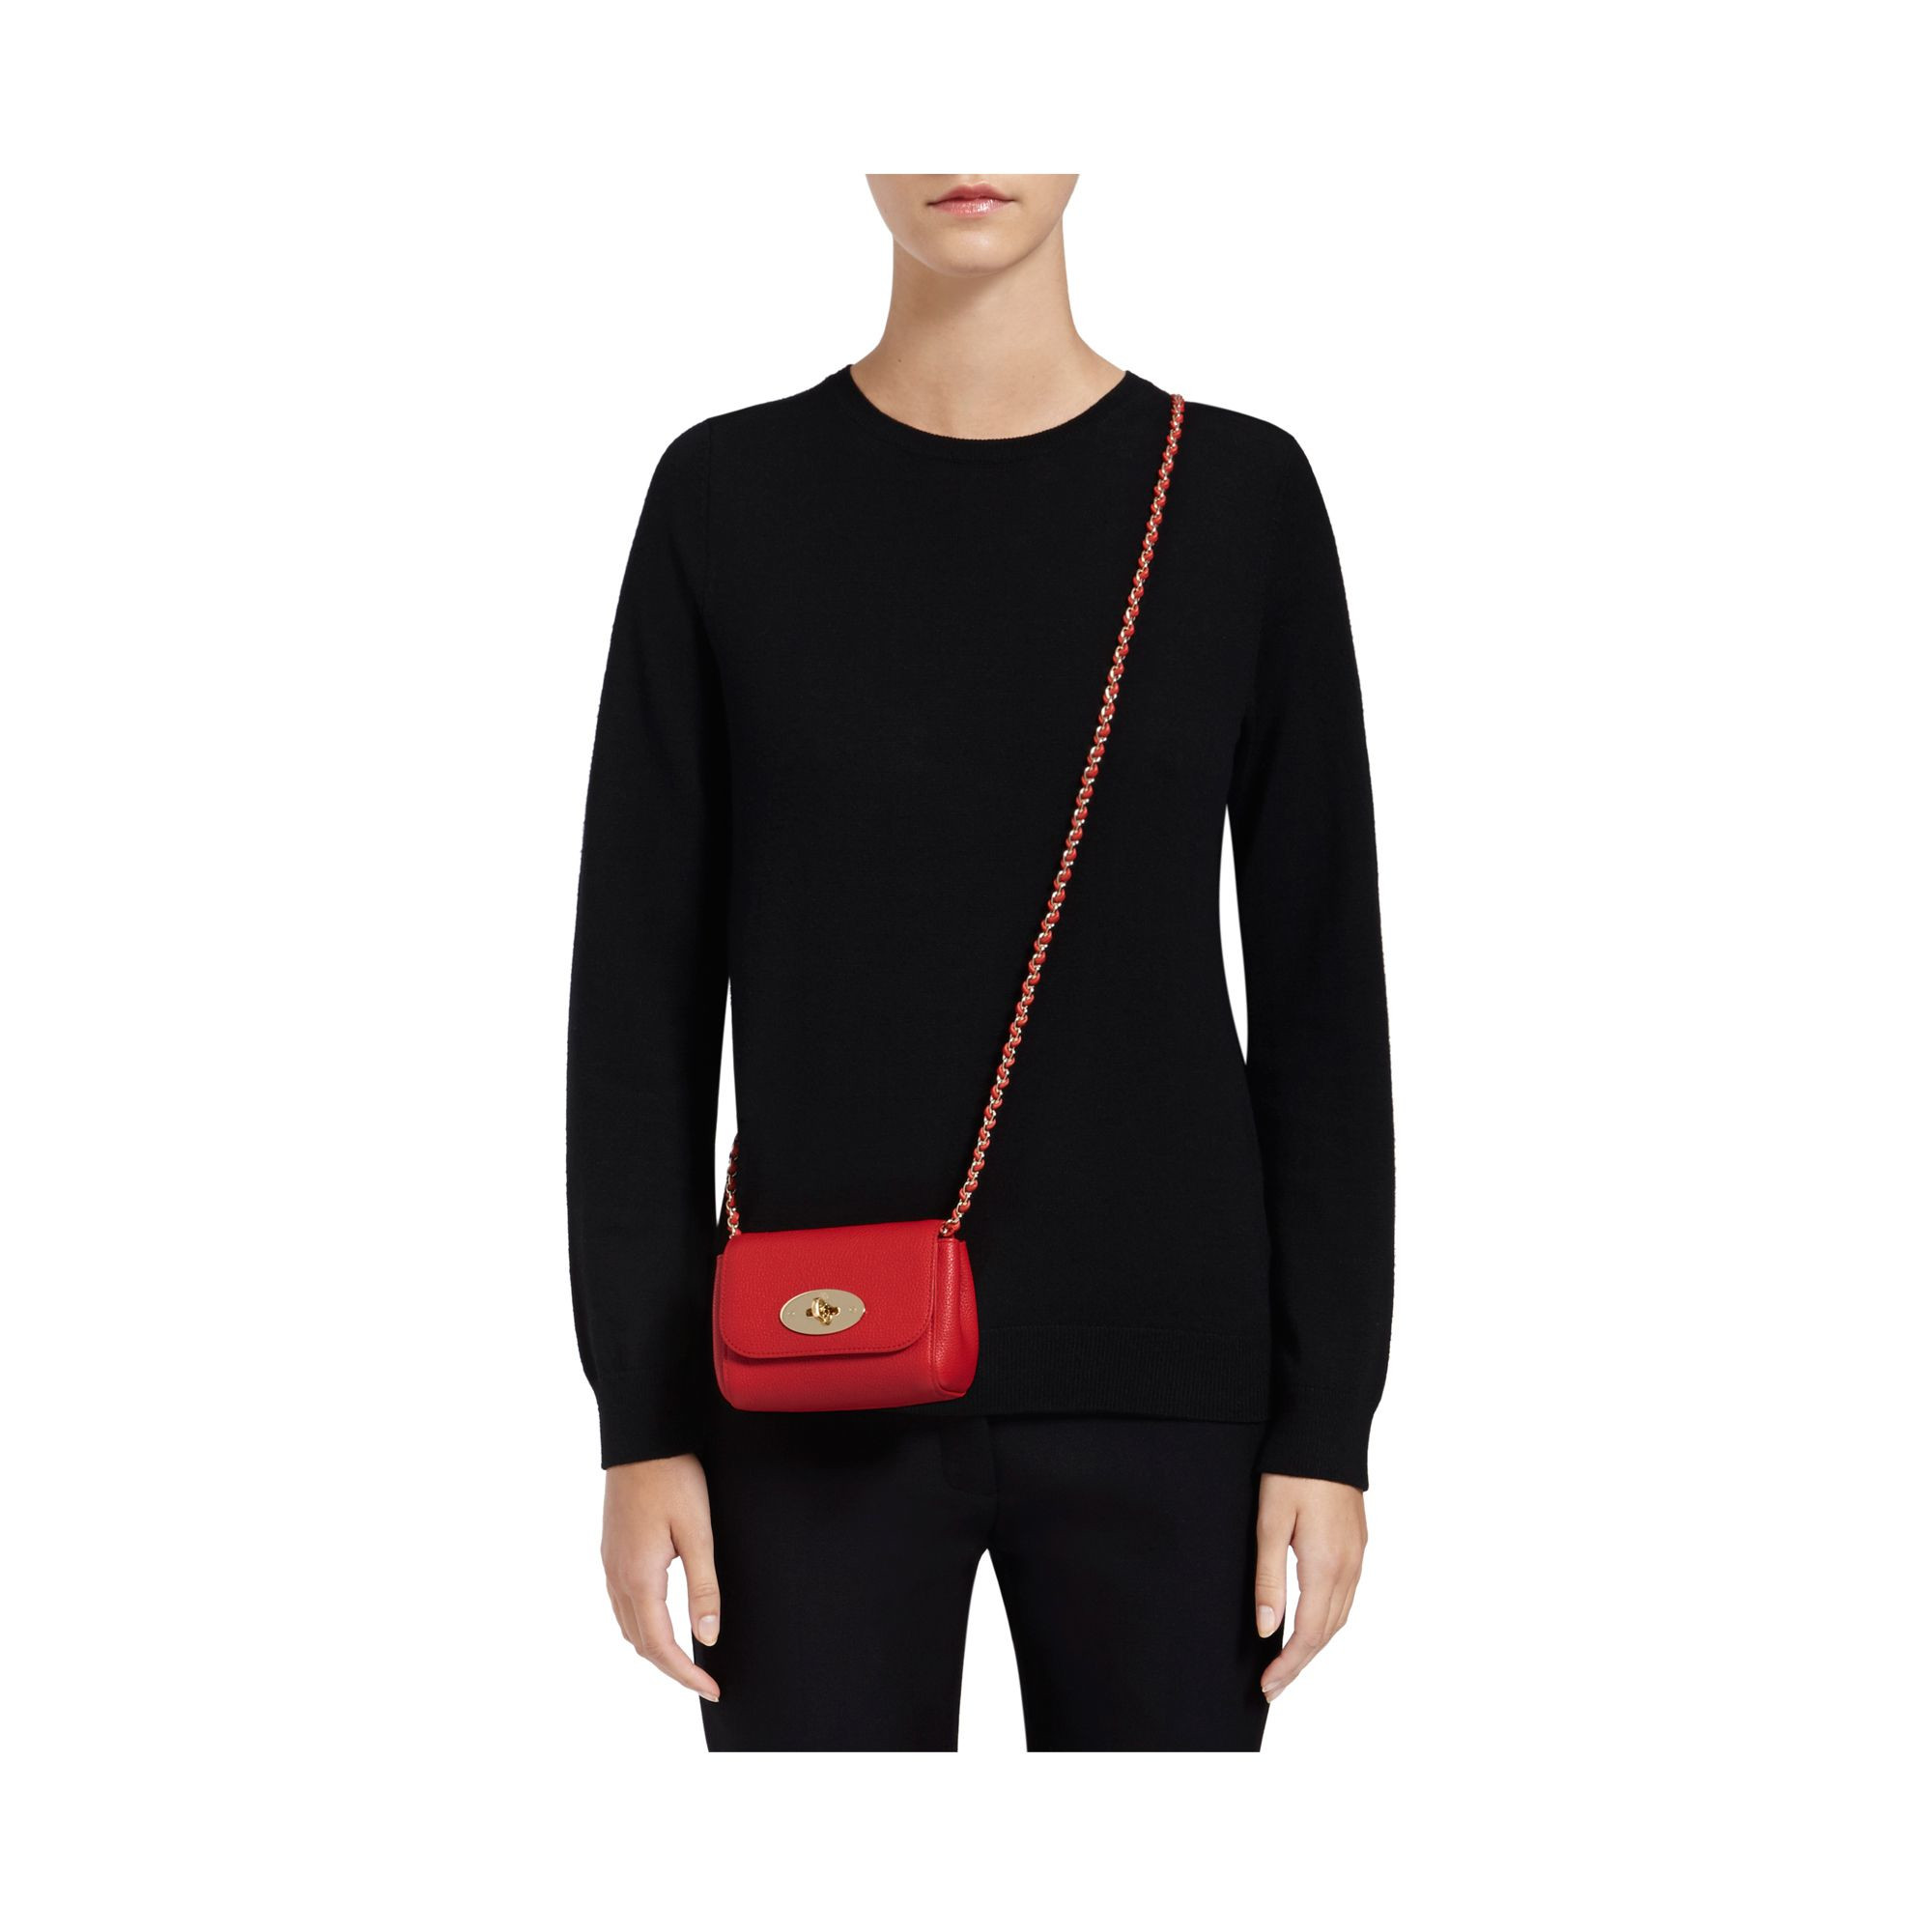 Mulberry Mini Lily Grained Leather Shoulder Bag in Red | Lyst